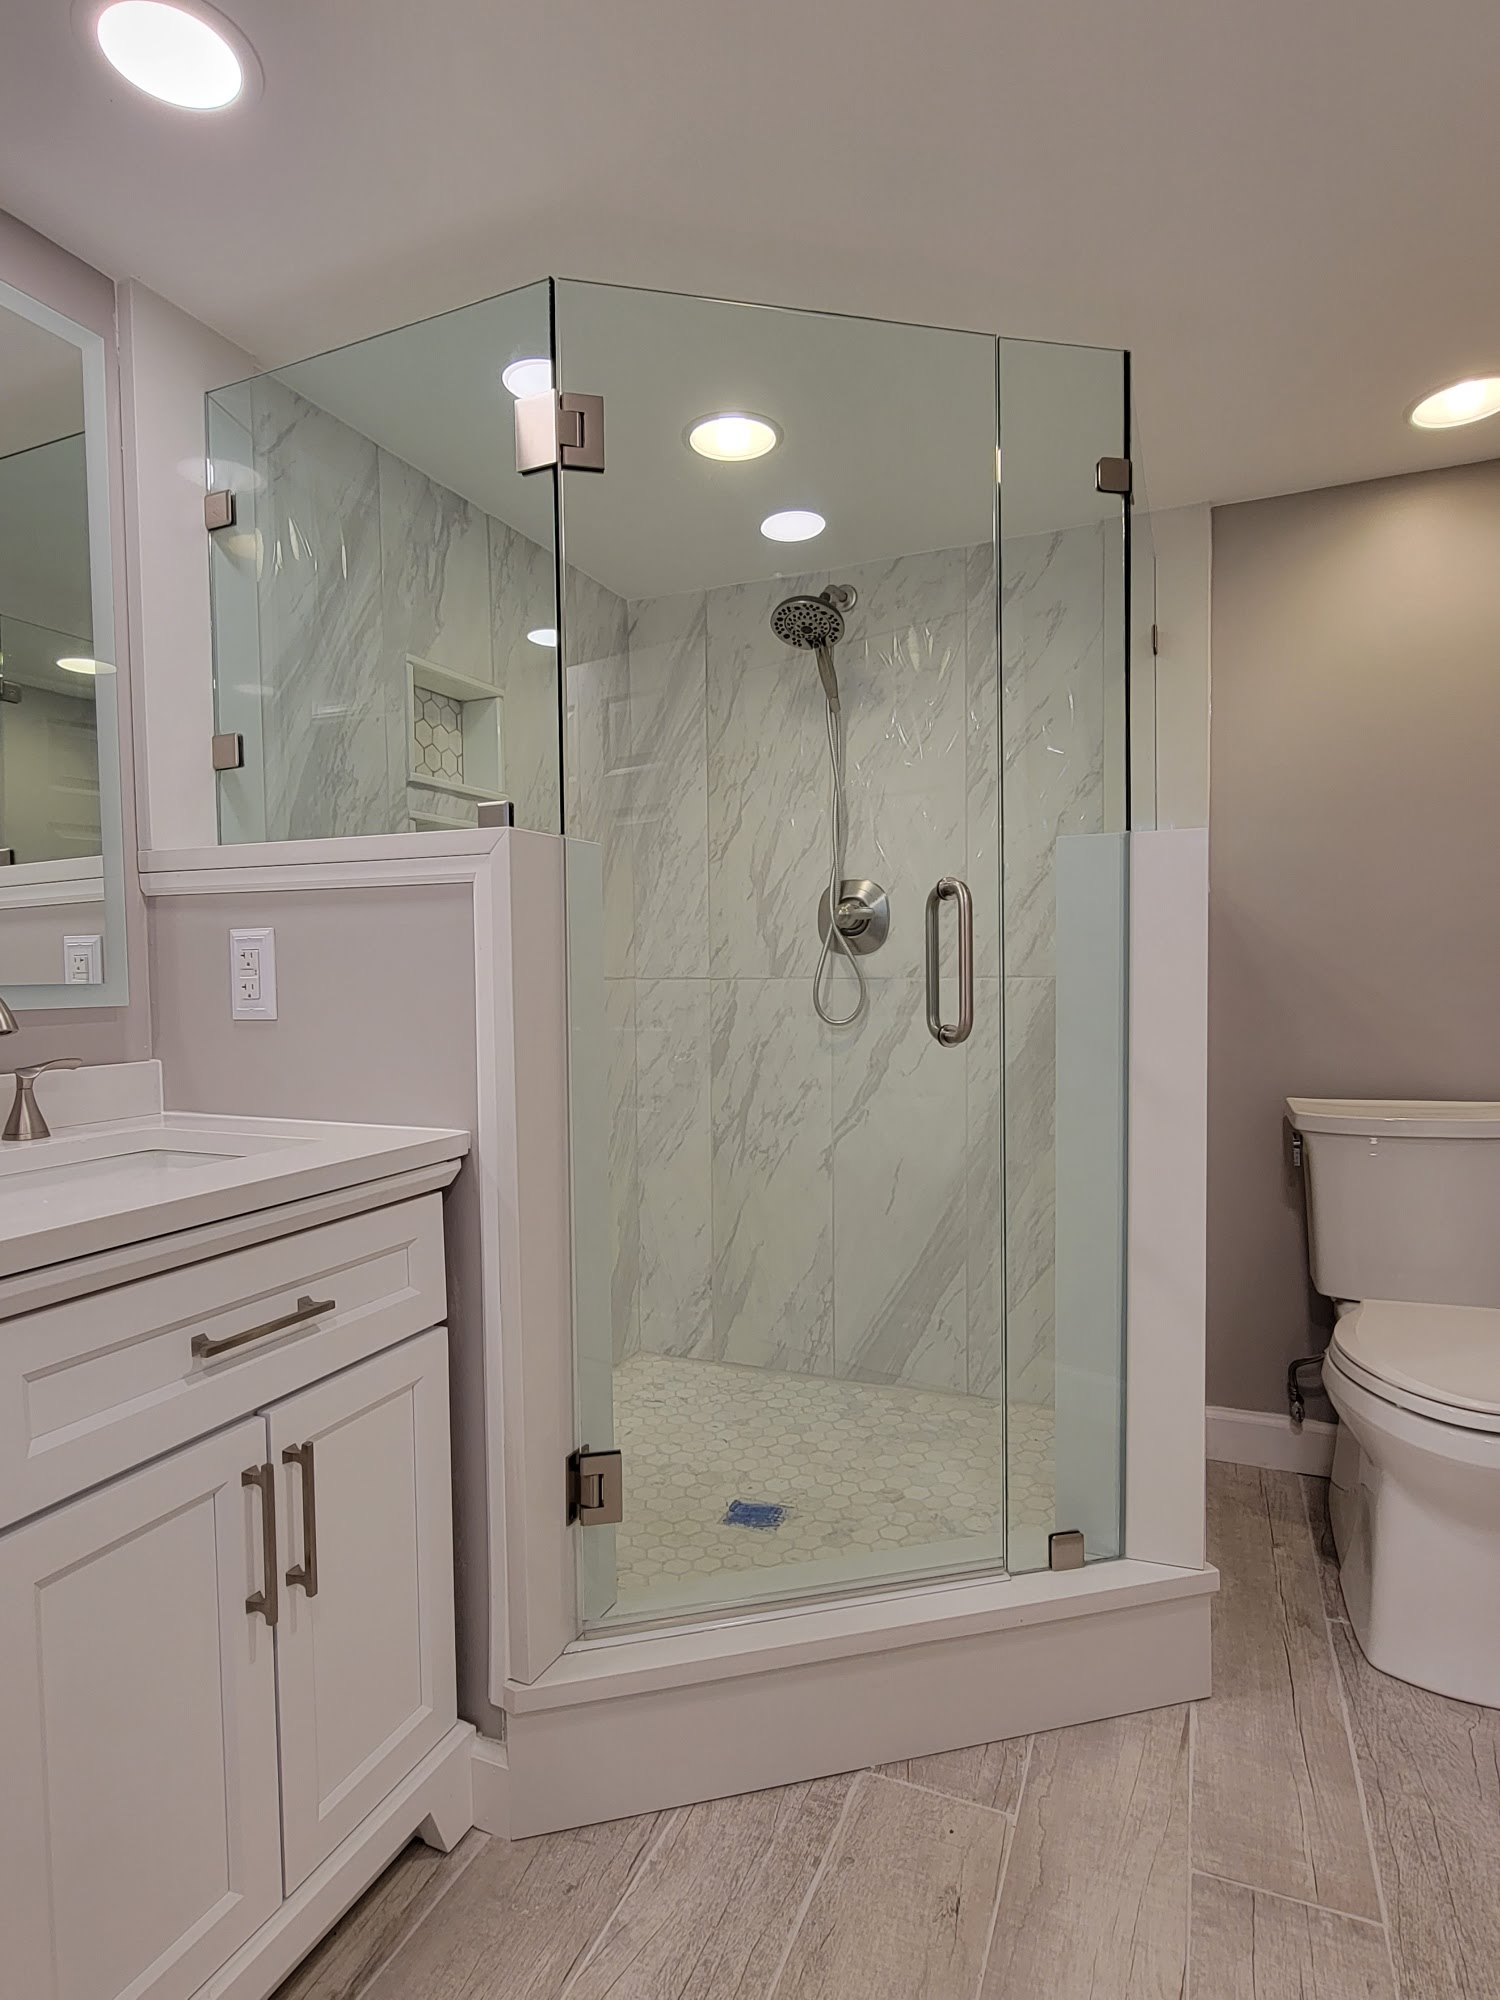 This installation was an incredibly tricky situation because the half walls terminate into the curb at an angle. Check out our blog post on shower door design for more information! https://www.showerdoorguy.com/blog/the-dos-and-donts-of-shower-design-b8ea20b0c88eaae3